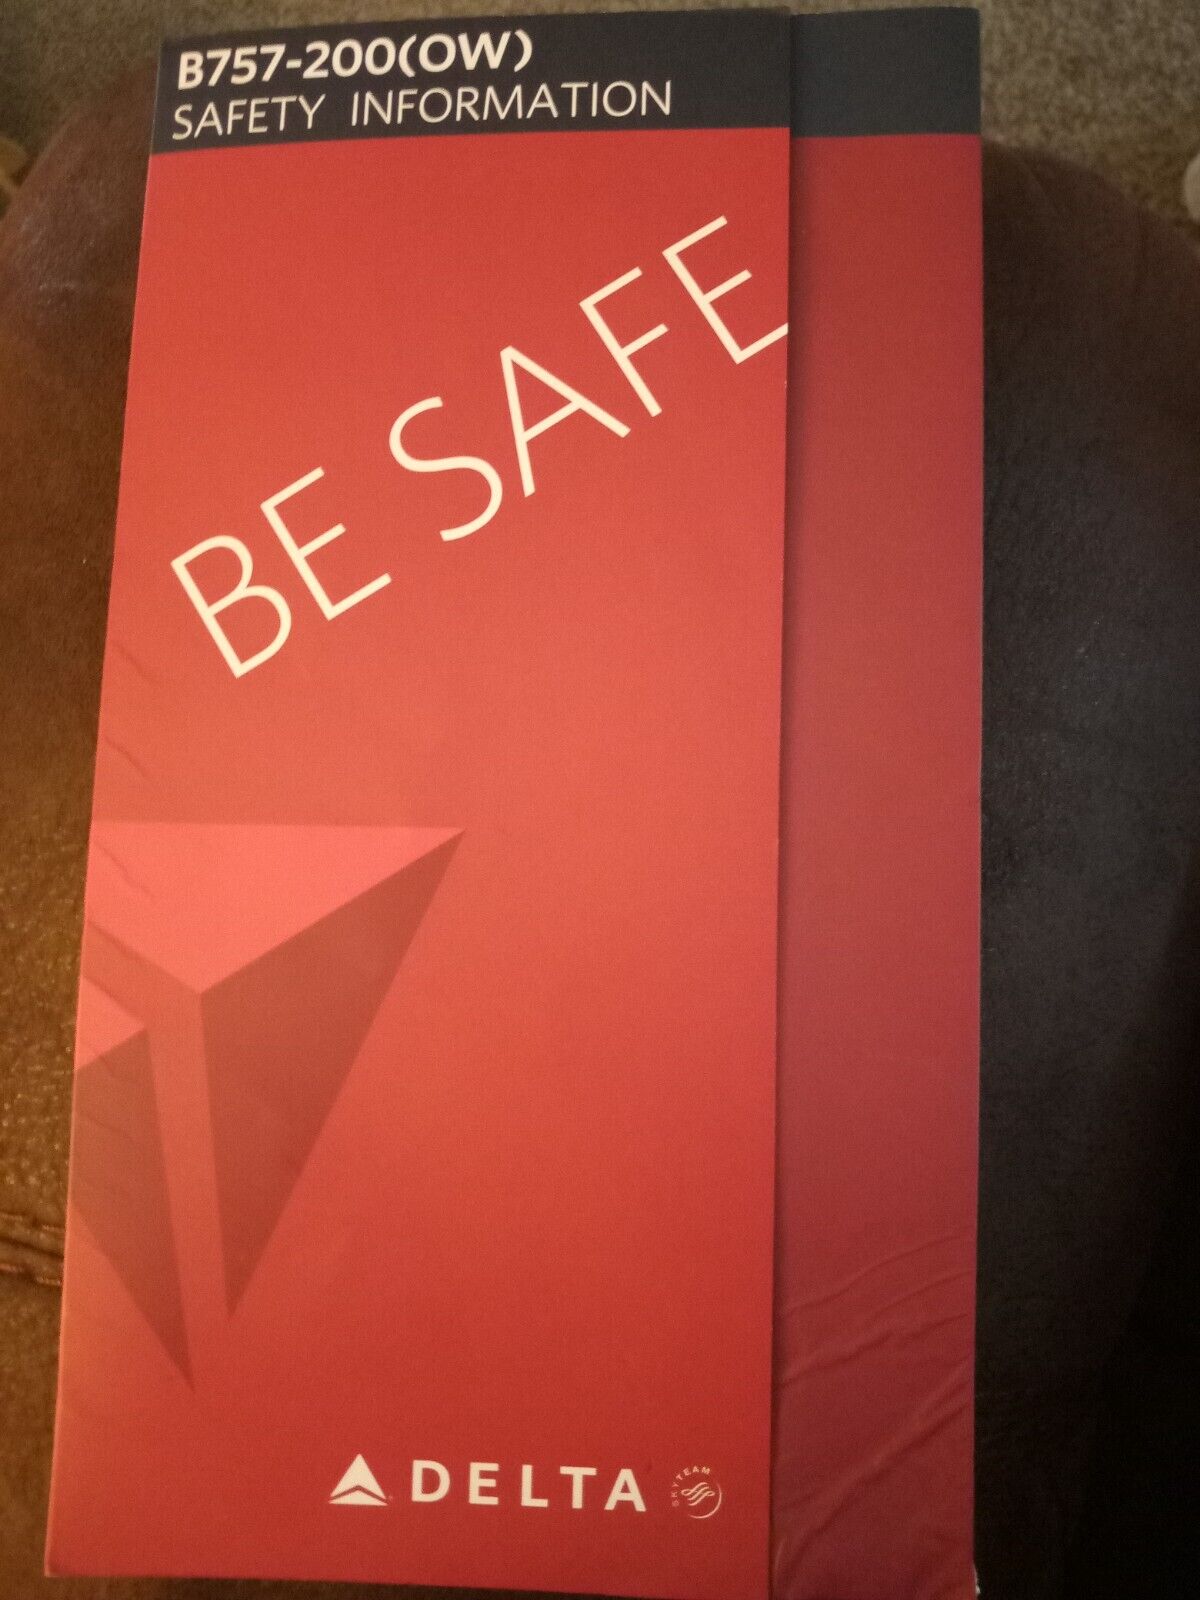 2014 DELTA B757-200(OW) SAFETY CARD